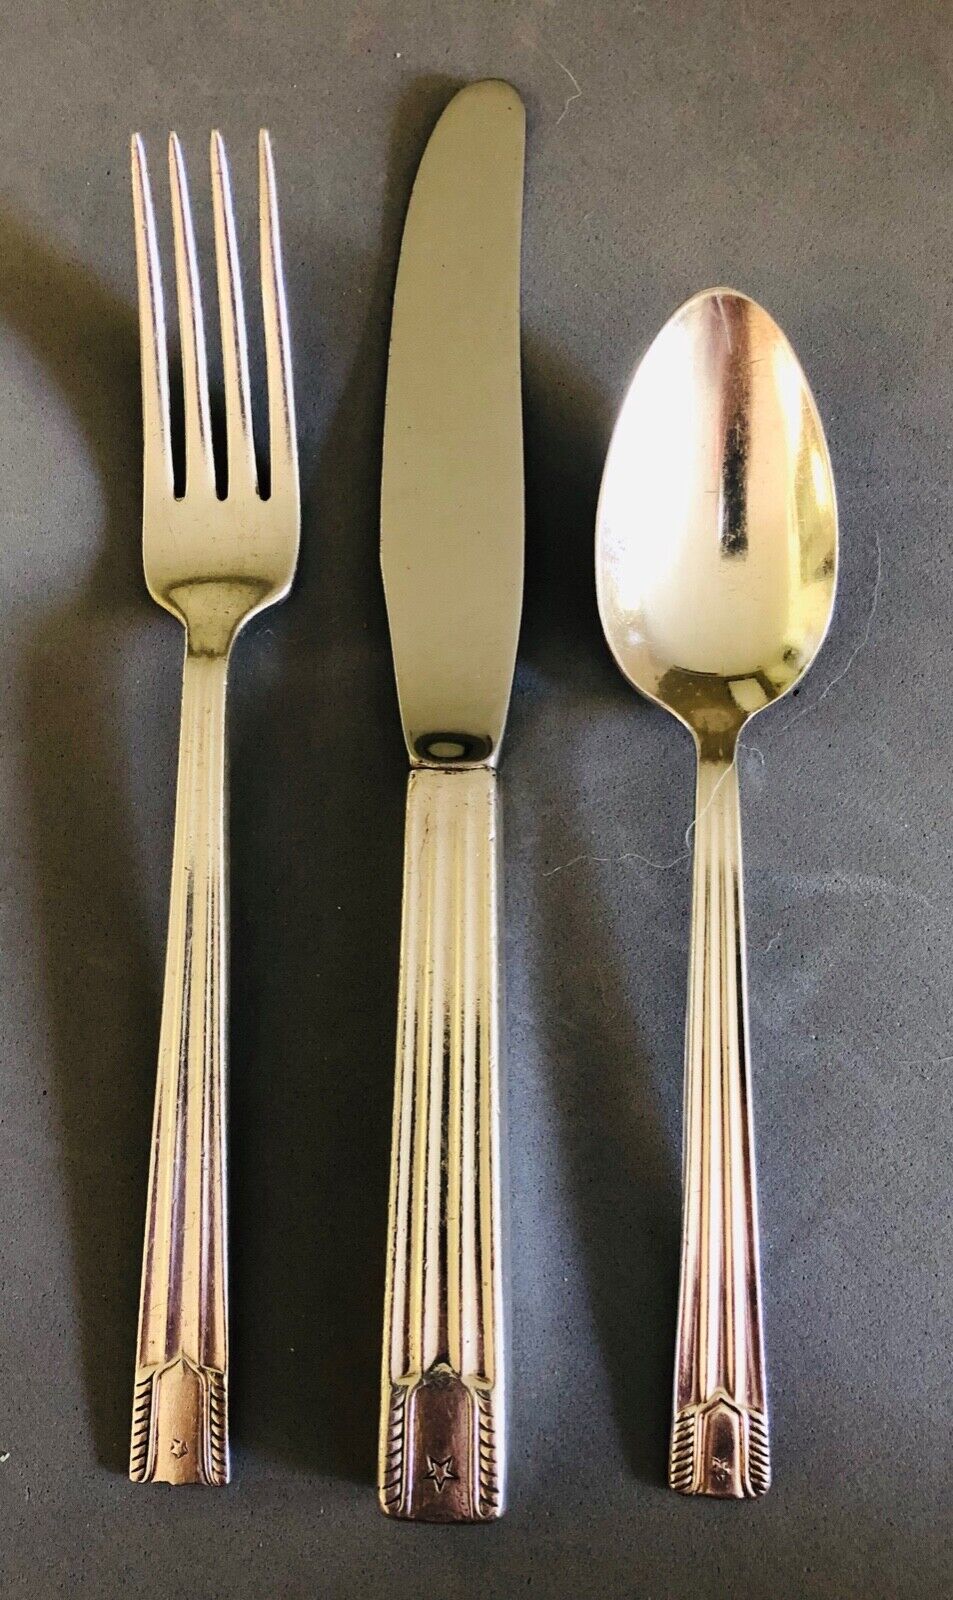 United Airlines Silver Plate Cutlery, Fork, Knife, Spoon Silverware - 1930s-40s